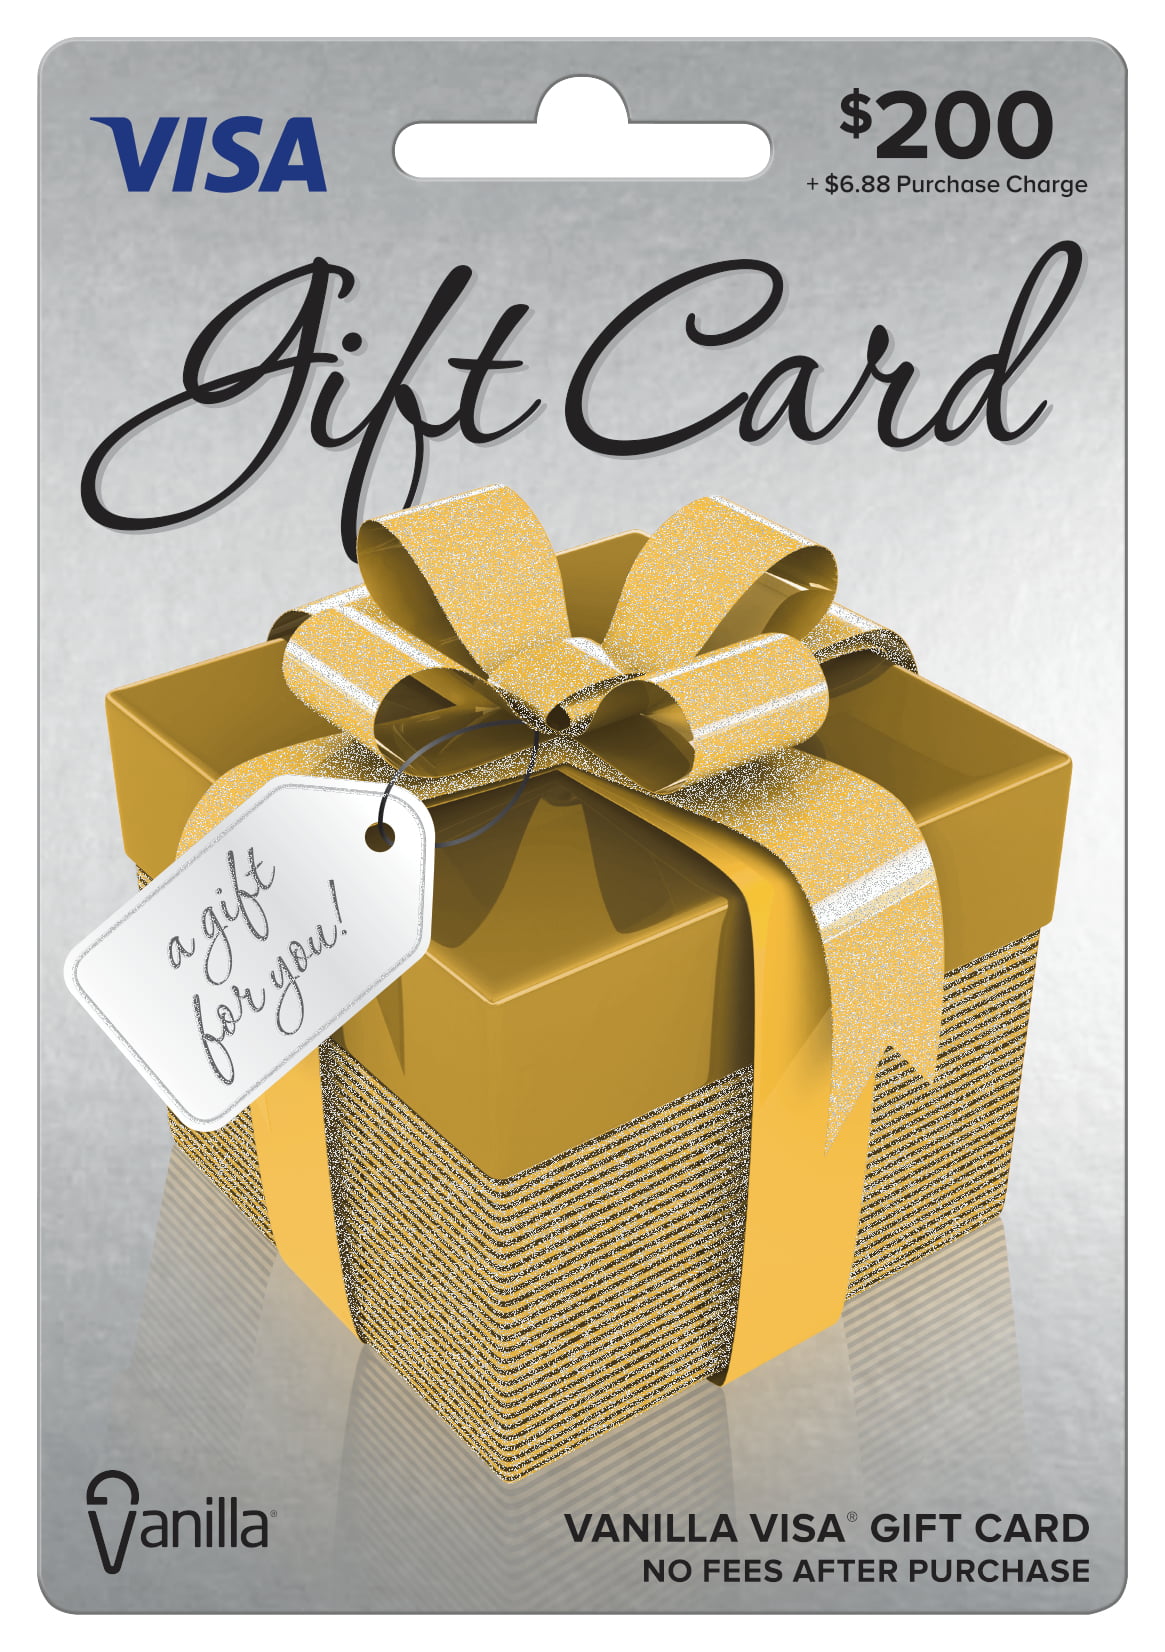 What Is The Zip Code On A Visa Gift Card